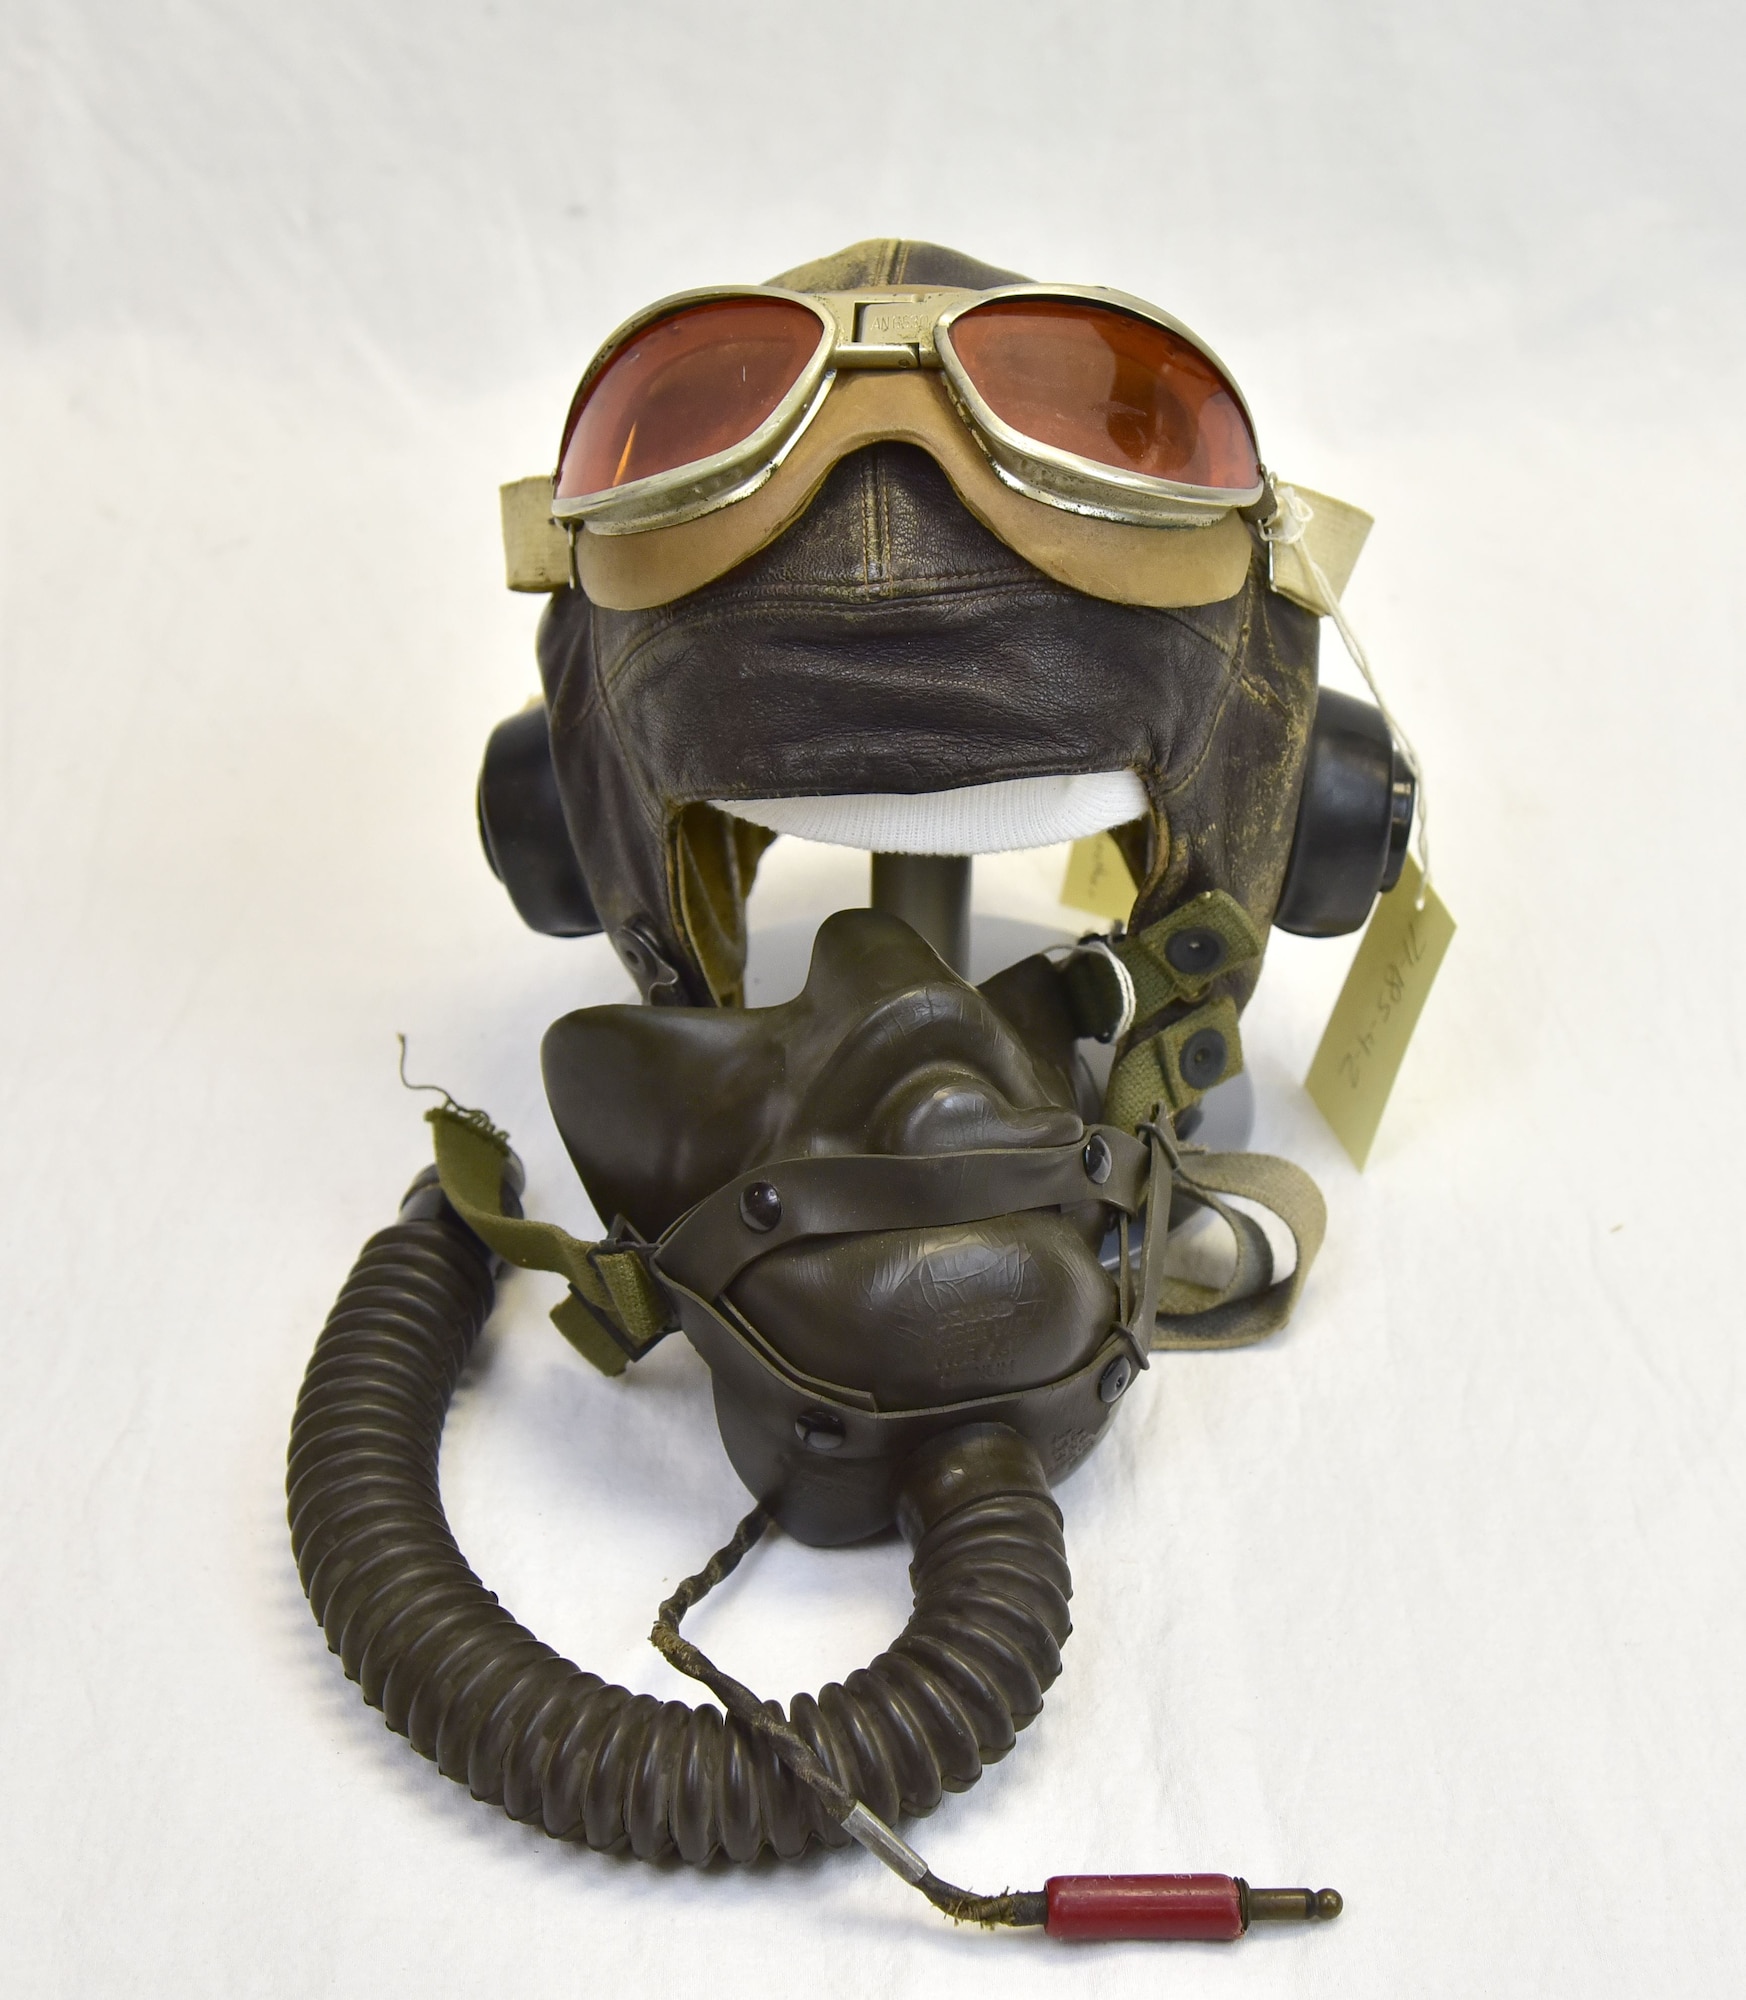 Plans call for this artifact to be displayed near the B-17F Memphis Belle™ as part of the new strategic bombardment exhibit in the WWII Gallery, which opens to the public on May 17, 2018. Goggles, oxygen mask, and helmet worn by B-17 pilot Capt William Rector on the USAAF’s first major raid against Berlin, March 6, 1944.